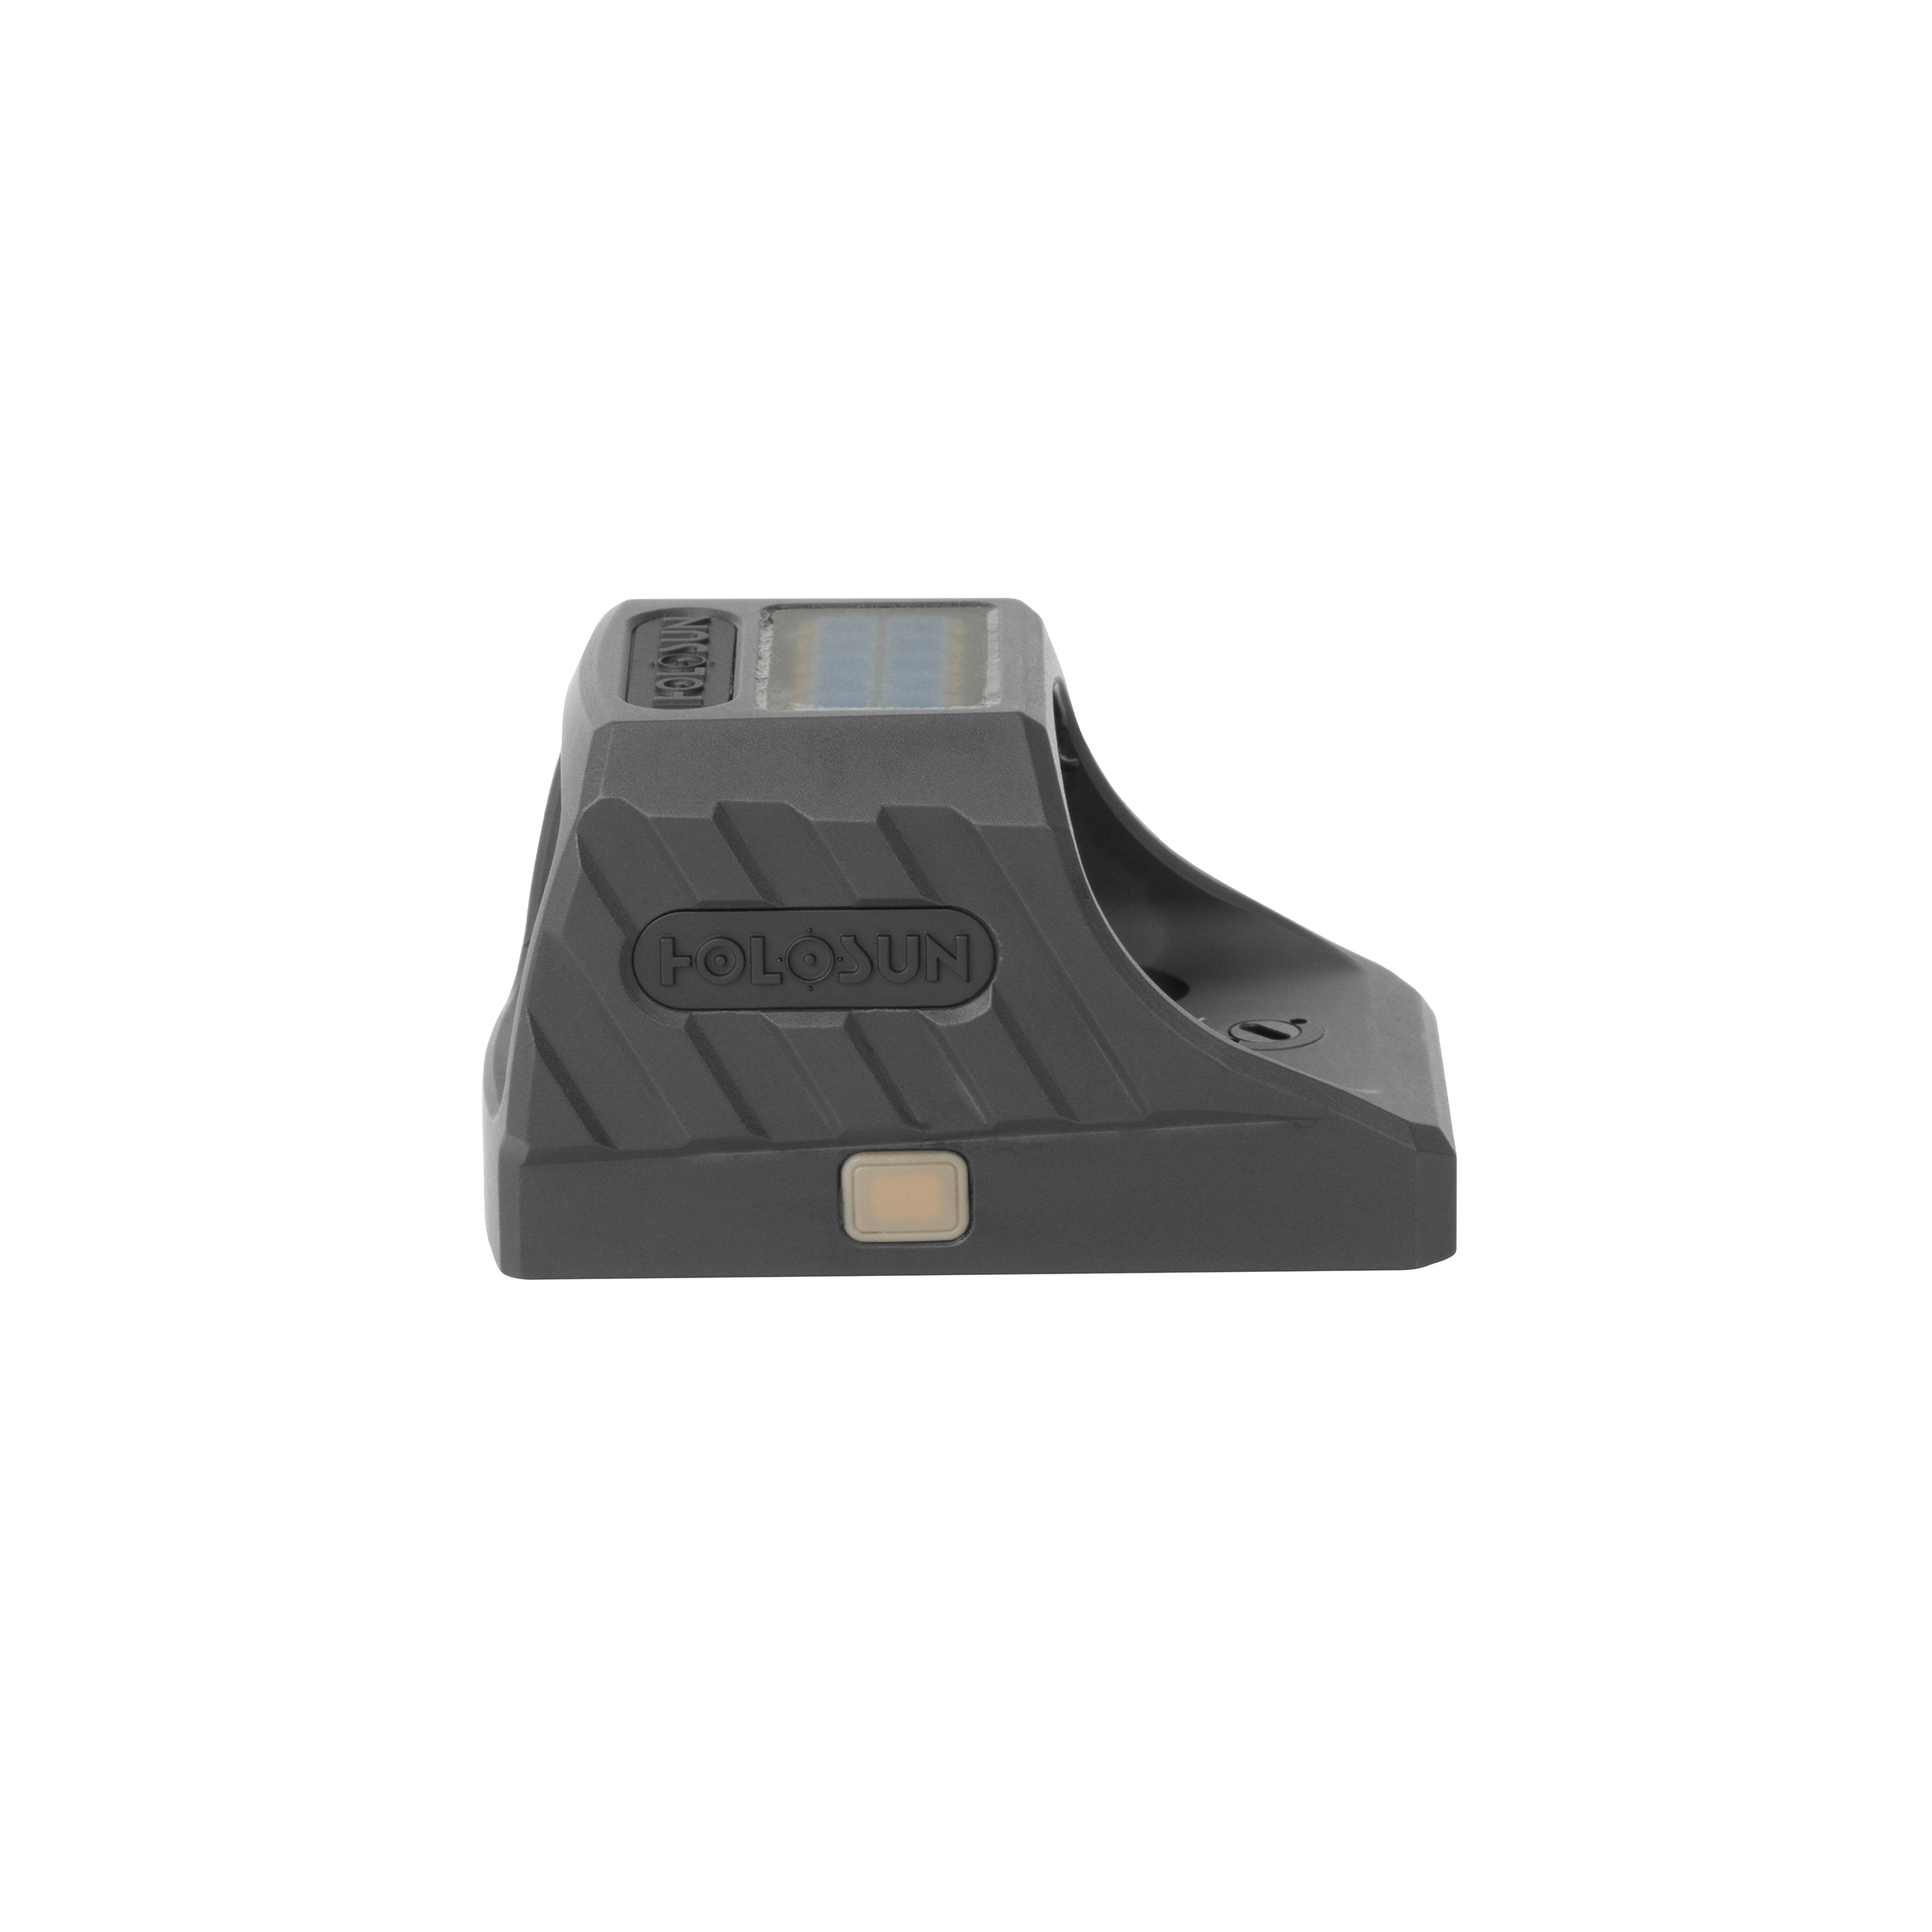 HOLOSUN - SCS-320-GR SOLAR CHARGING SIGHT FOR SIG SAUER P320 OR